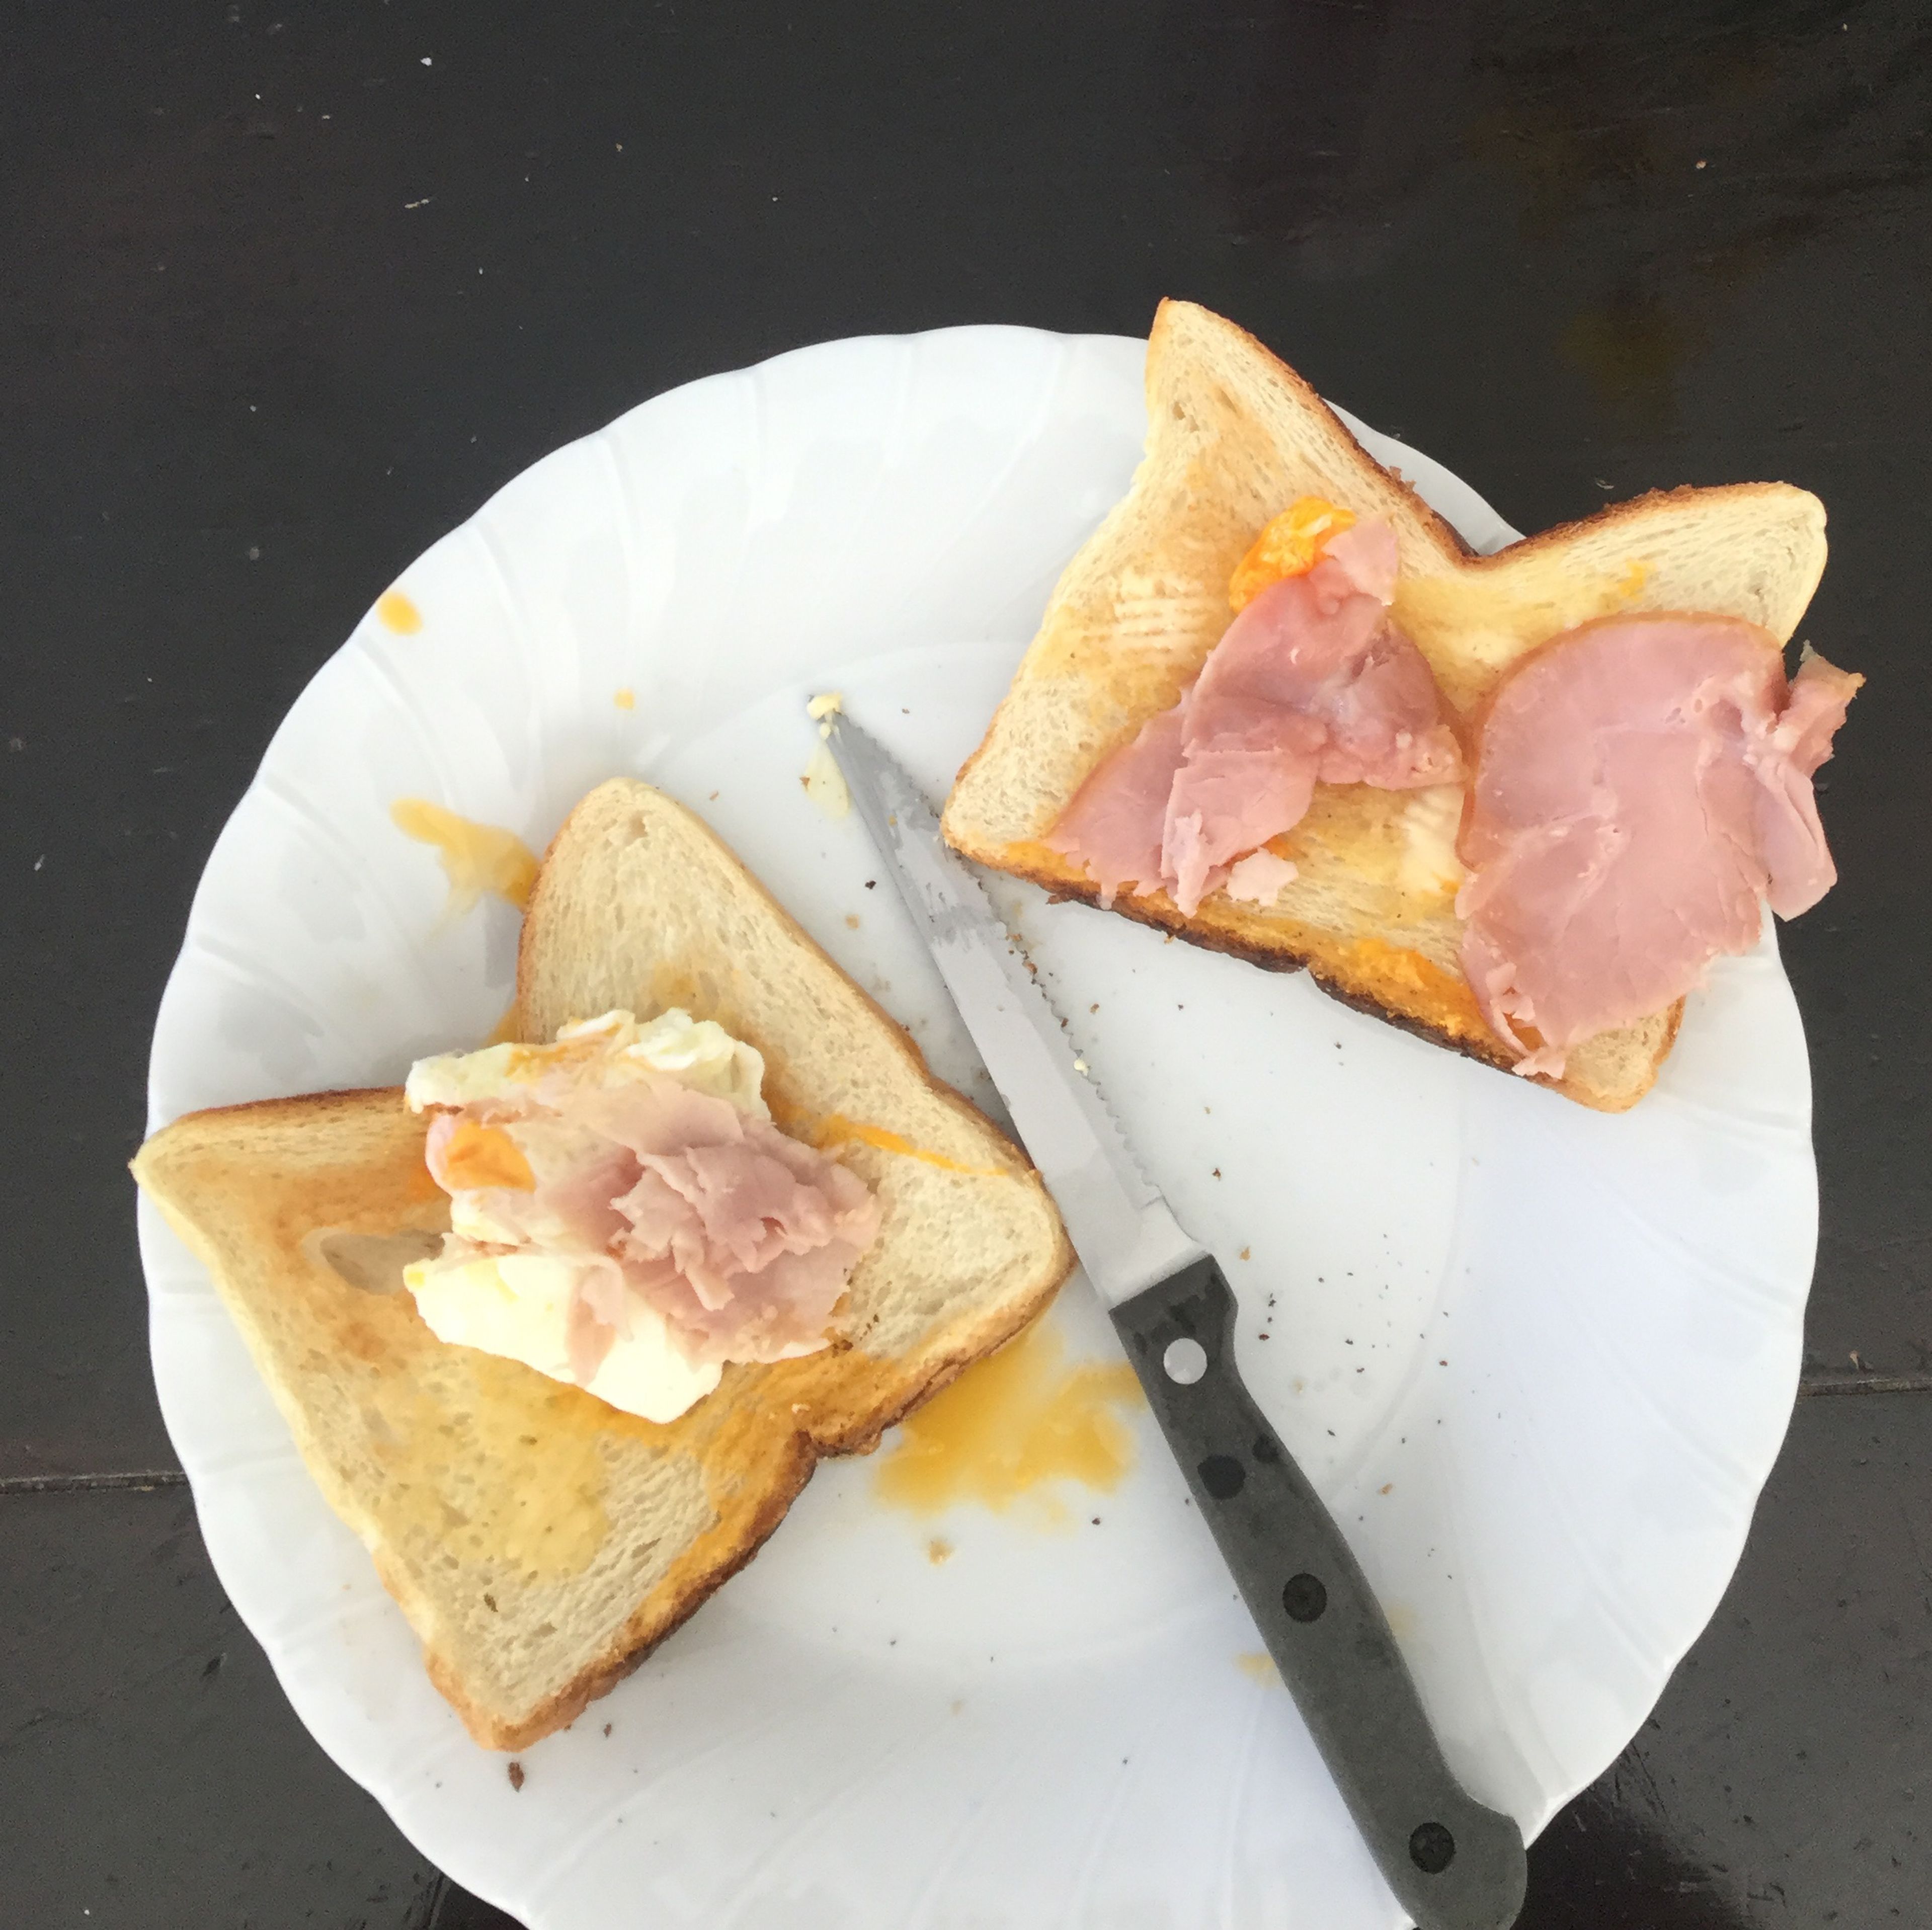 Yumm😋 I love toast in the morning, don’t you! Put your bread in the toaster until your liking. Wack your eggs on the stove and... boom! There you have it put some ham in the microwave cook until starts to pop! Then put it all together and yay a beautiful breakfast